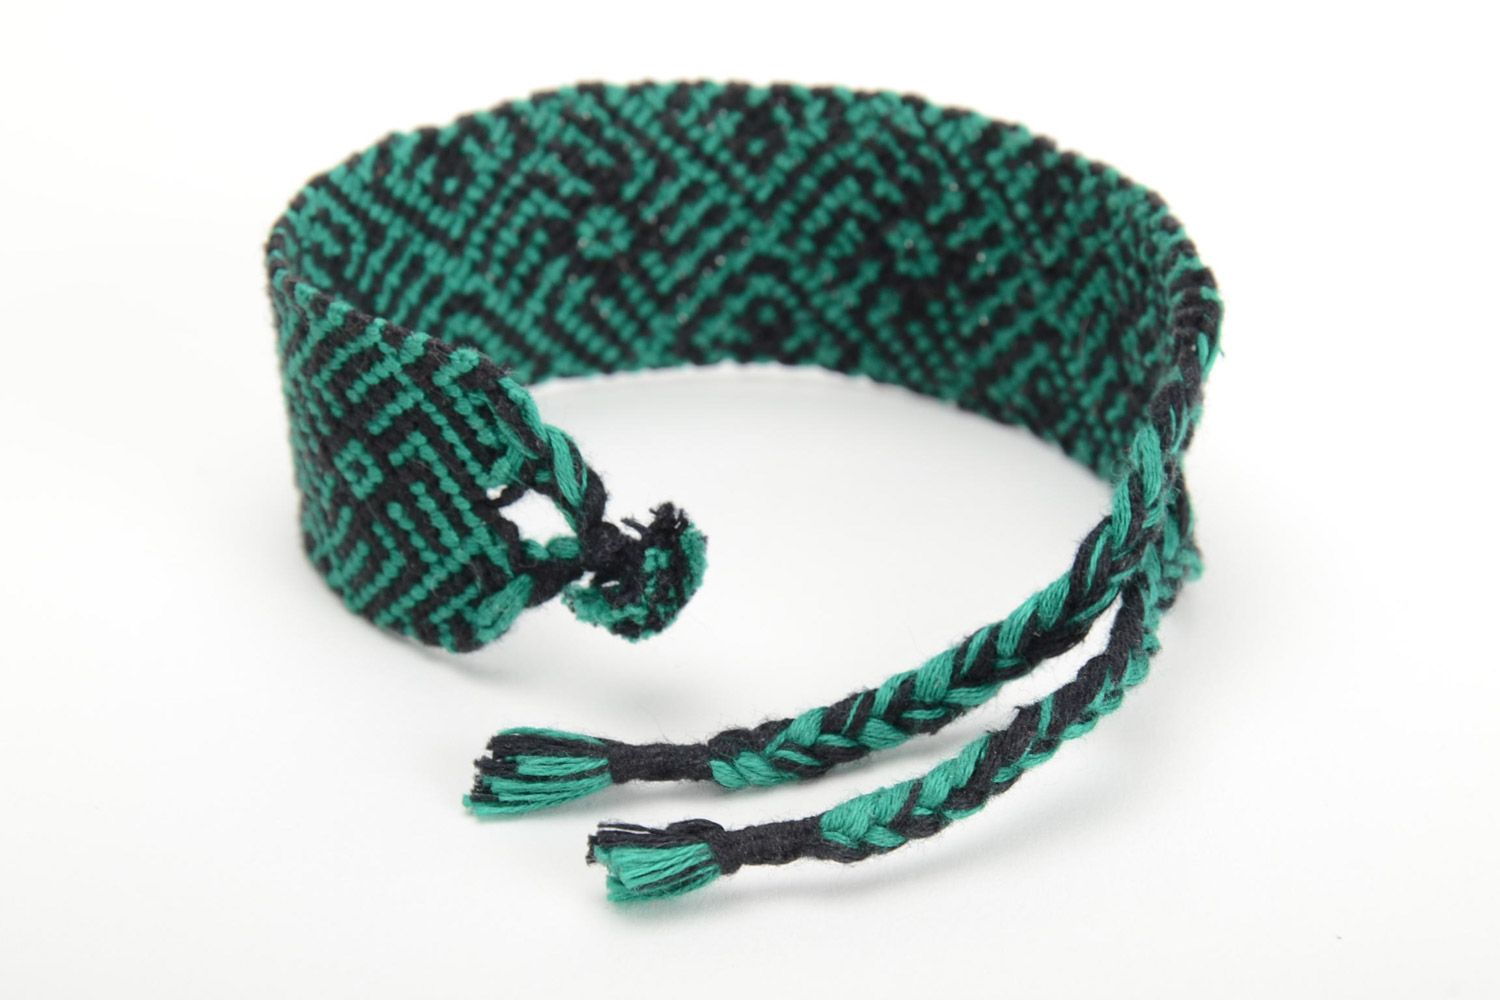 Handmade broad friendship wrist bracelet woven of embroidery floss of green color photo 3